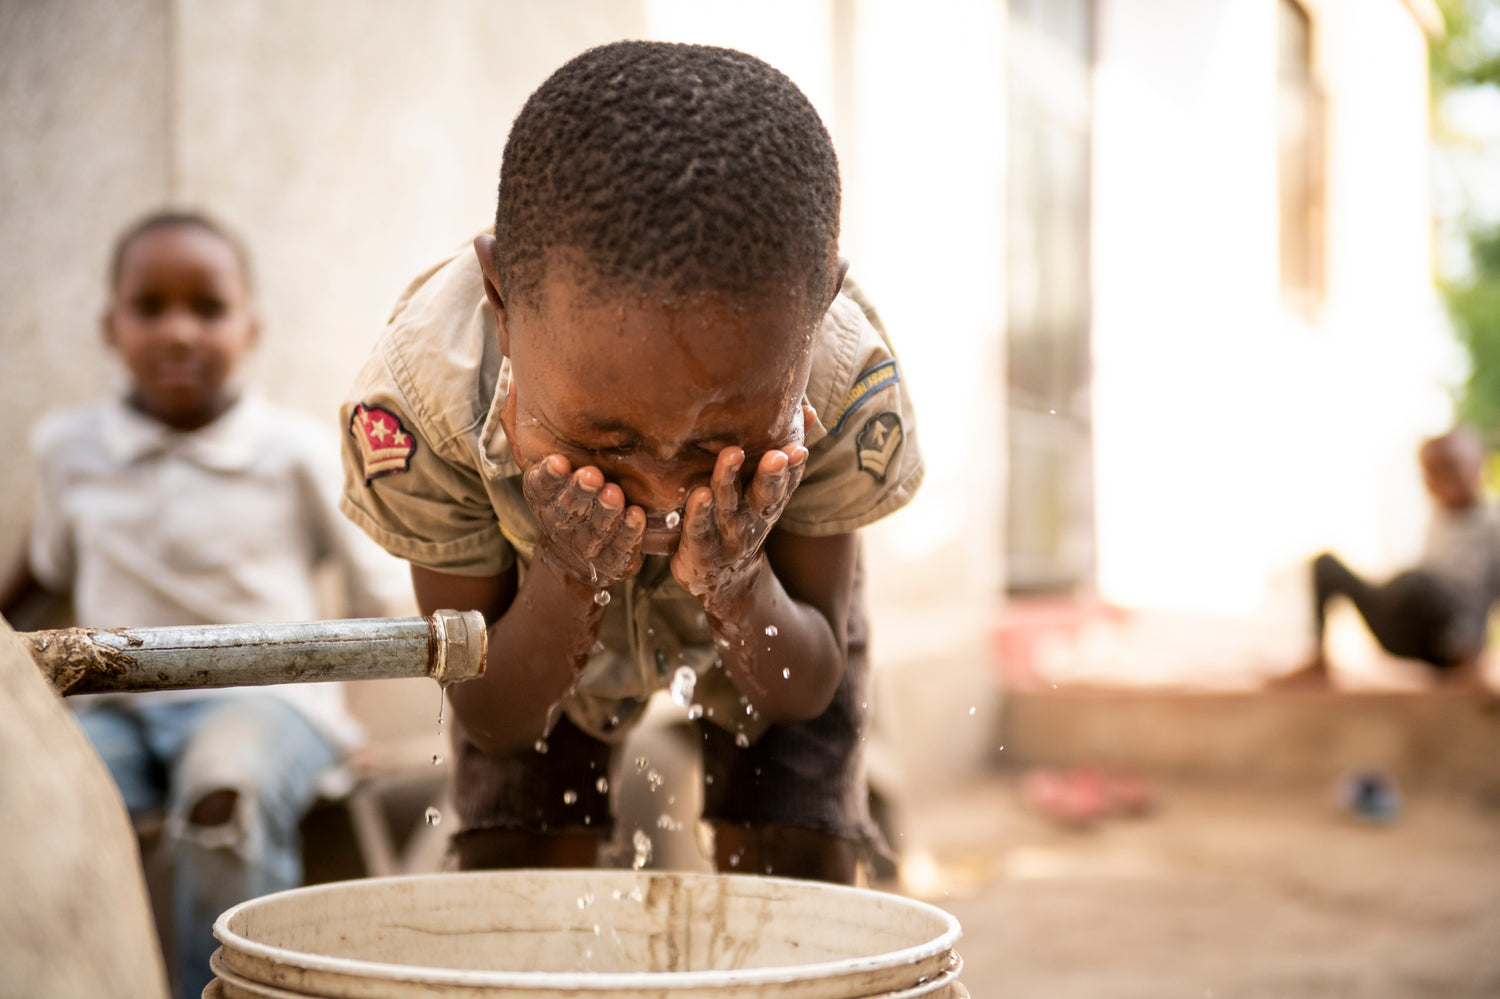 A boy splashes water on his face from his family's rainwater harvesting system.